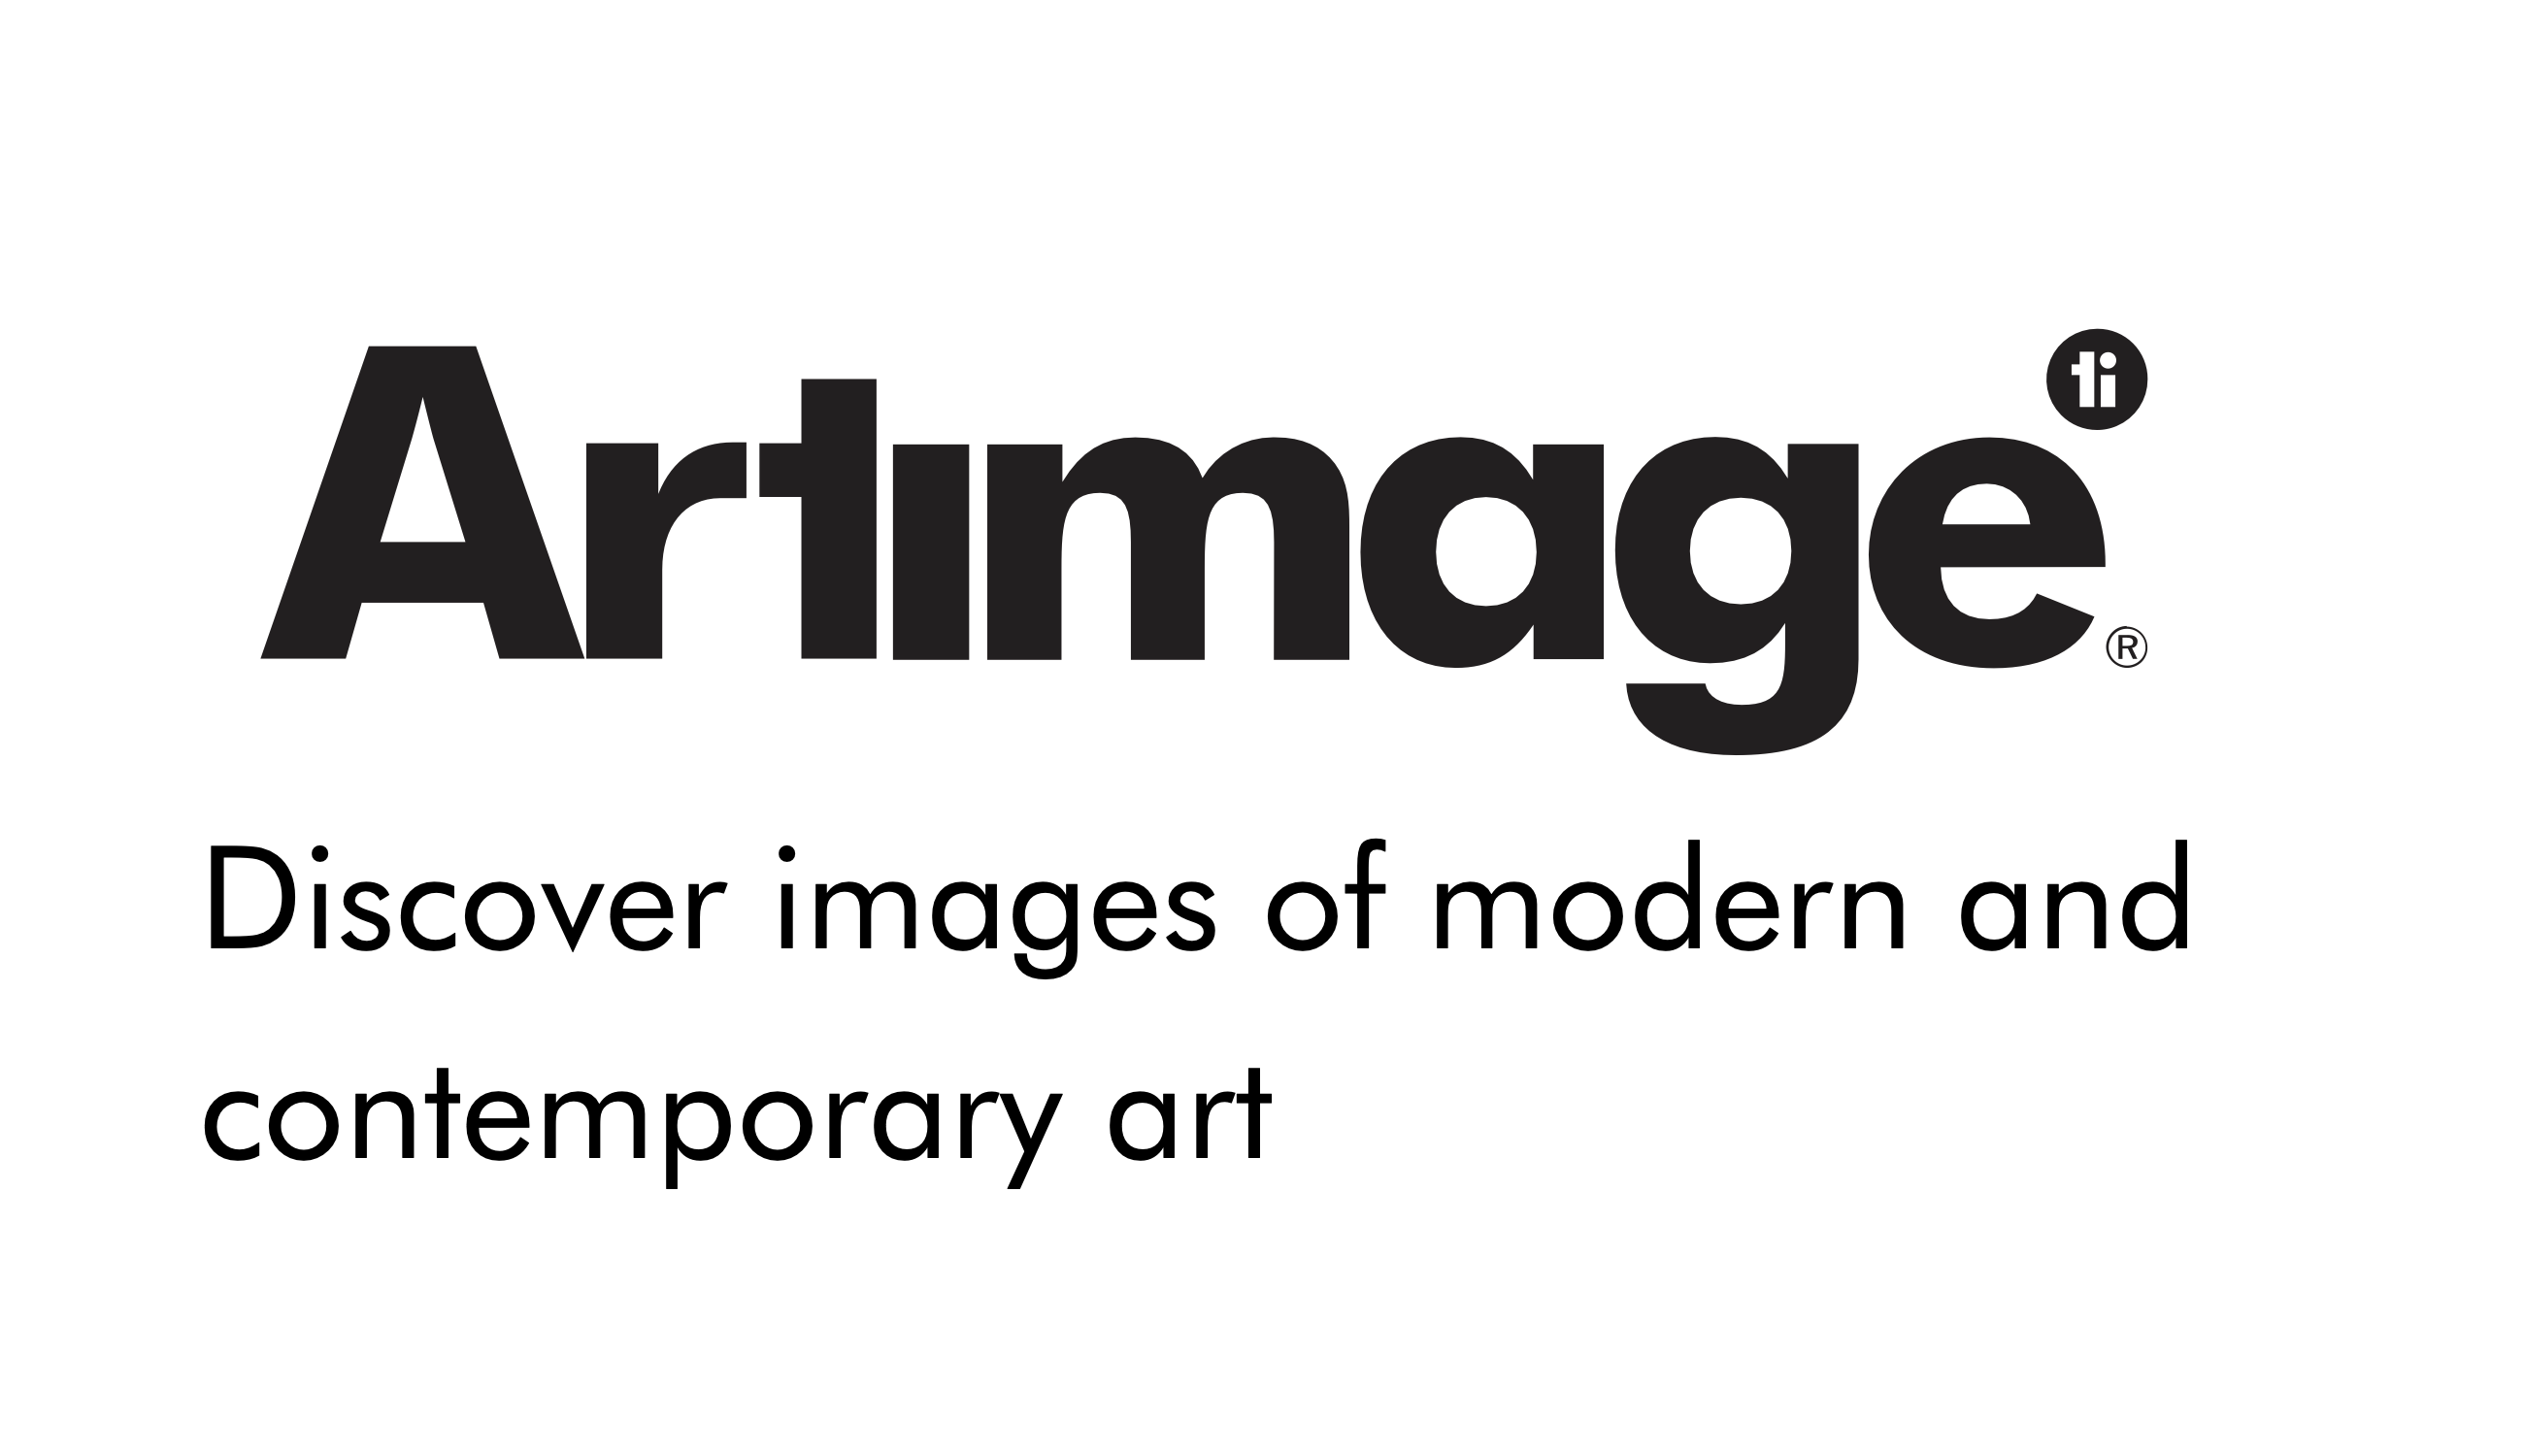 Artimage Logo - Artimage is a service from DACS, the UK’s flagship visual artists’ rights management organisation